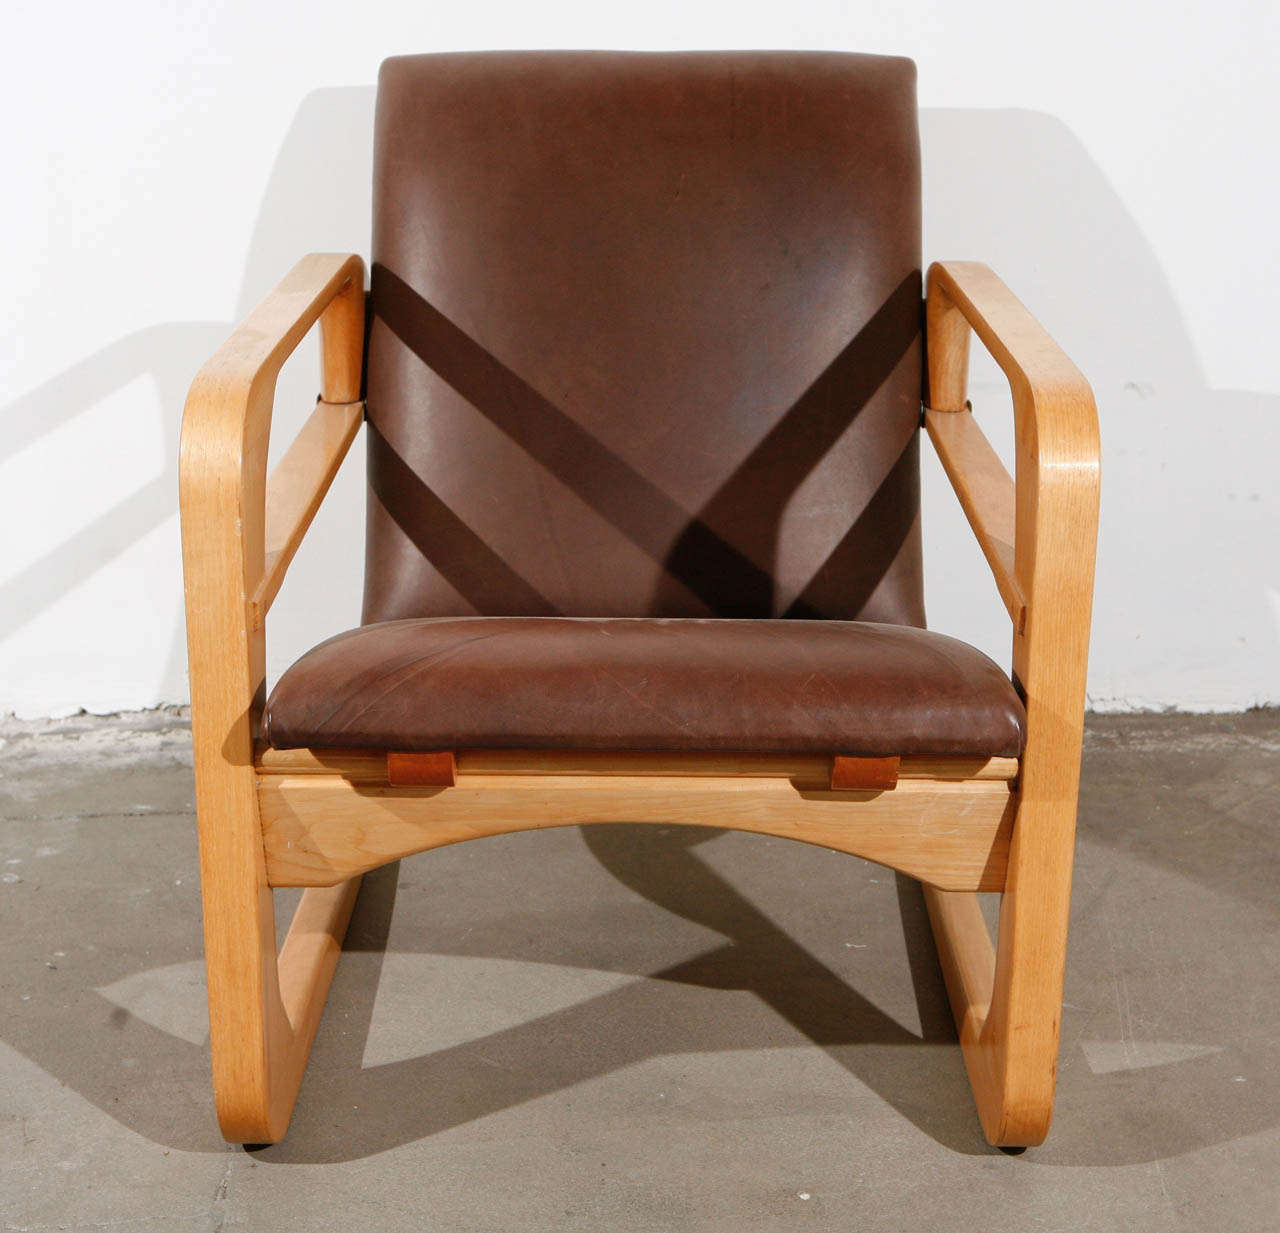 K.E.M. Weber  'Airline chair' produced for the Walt Disney Company